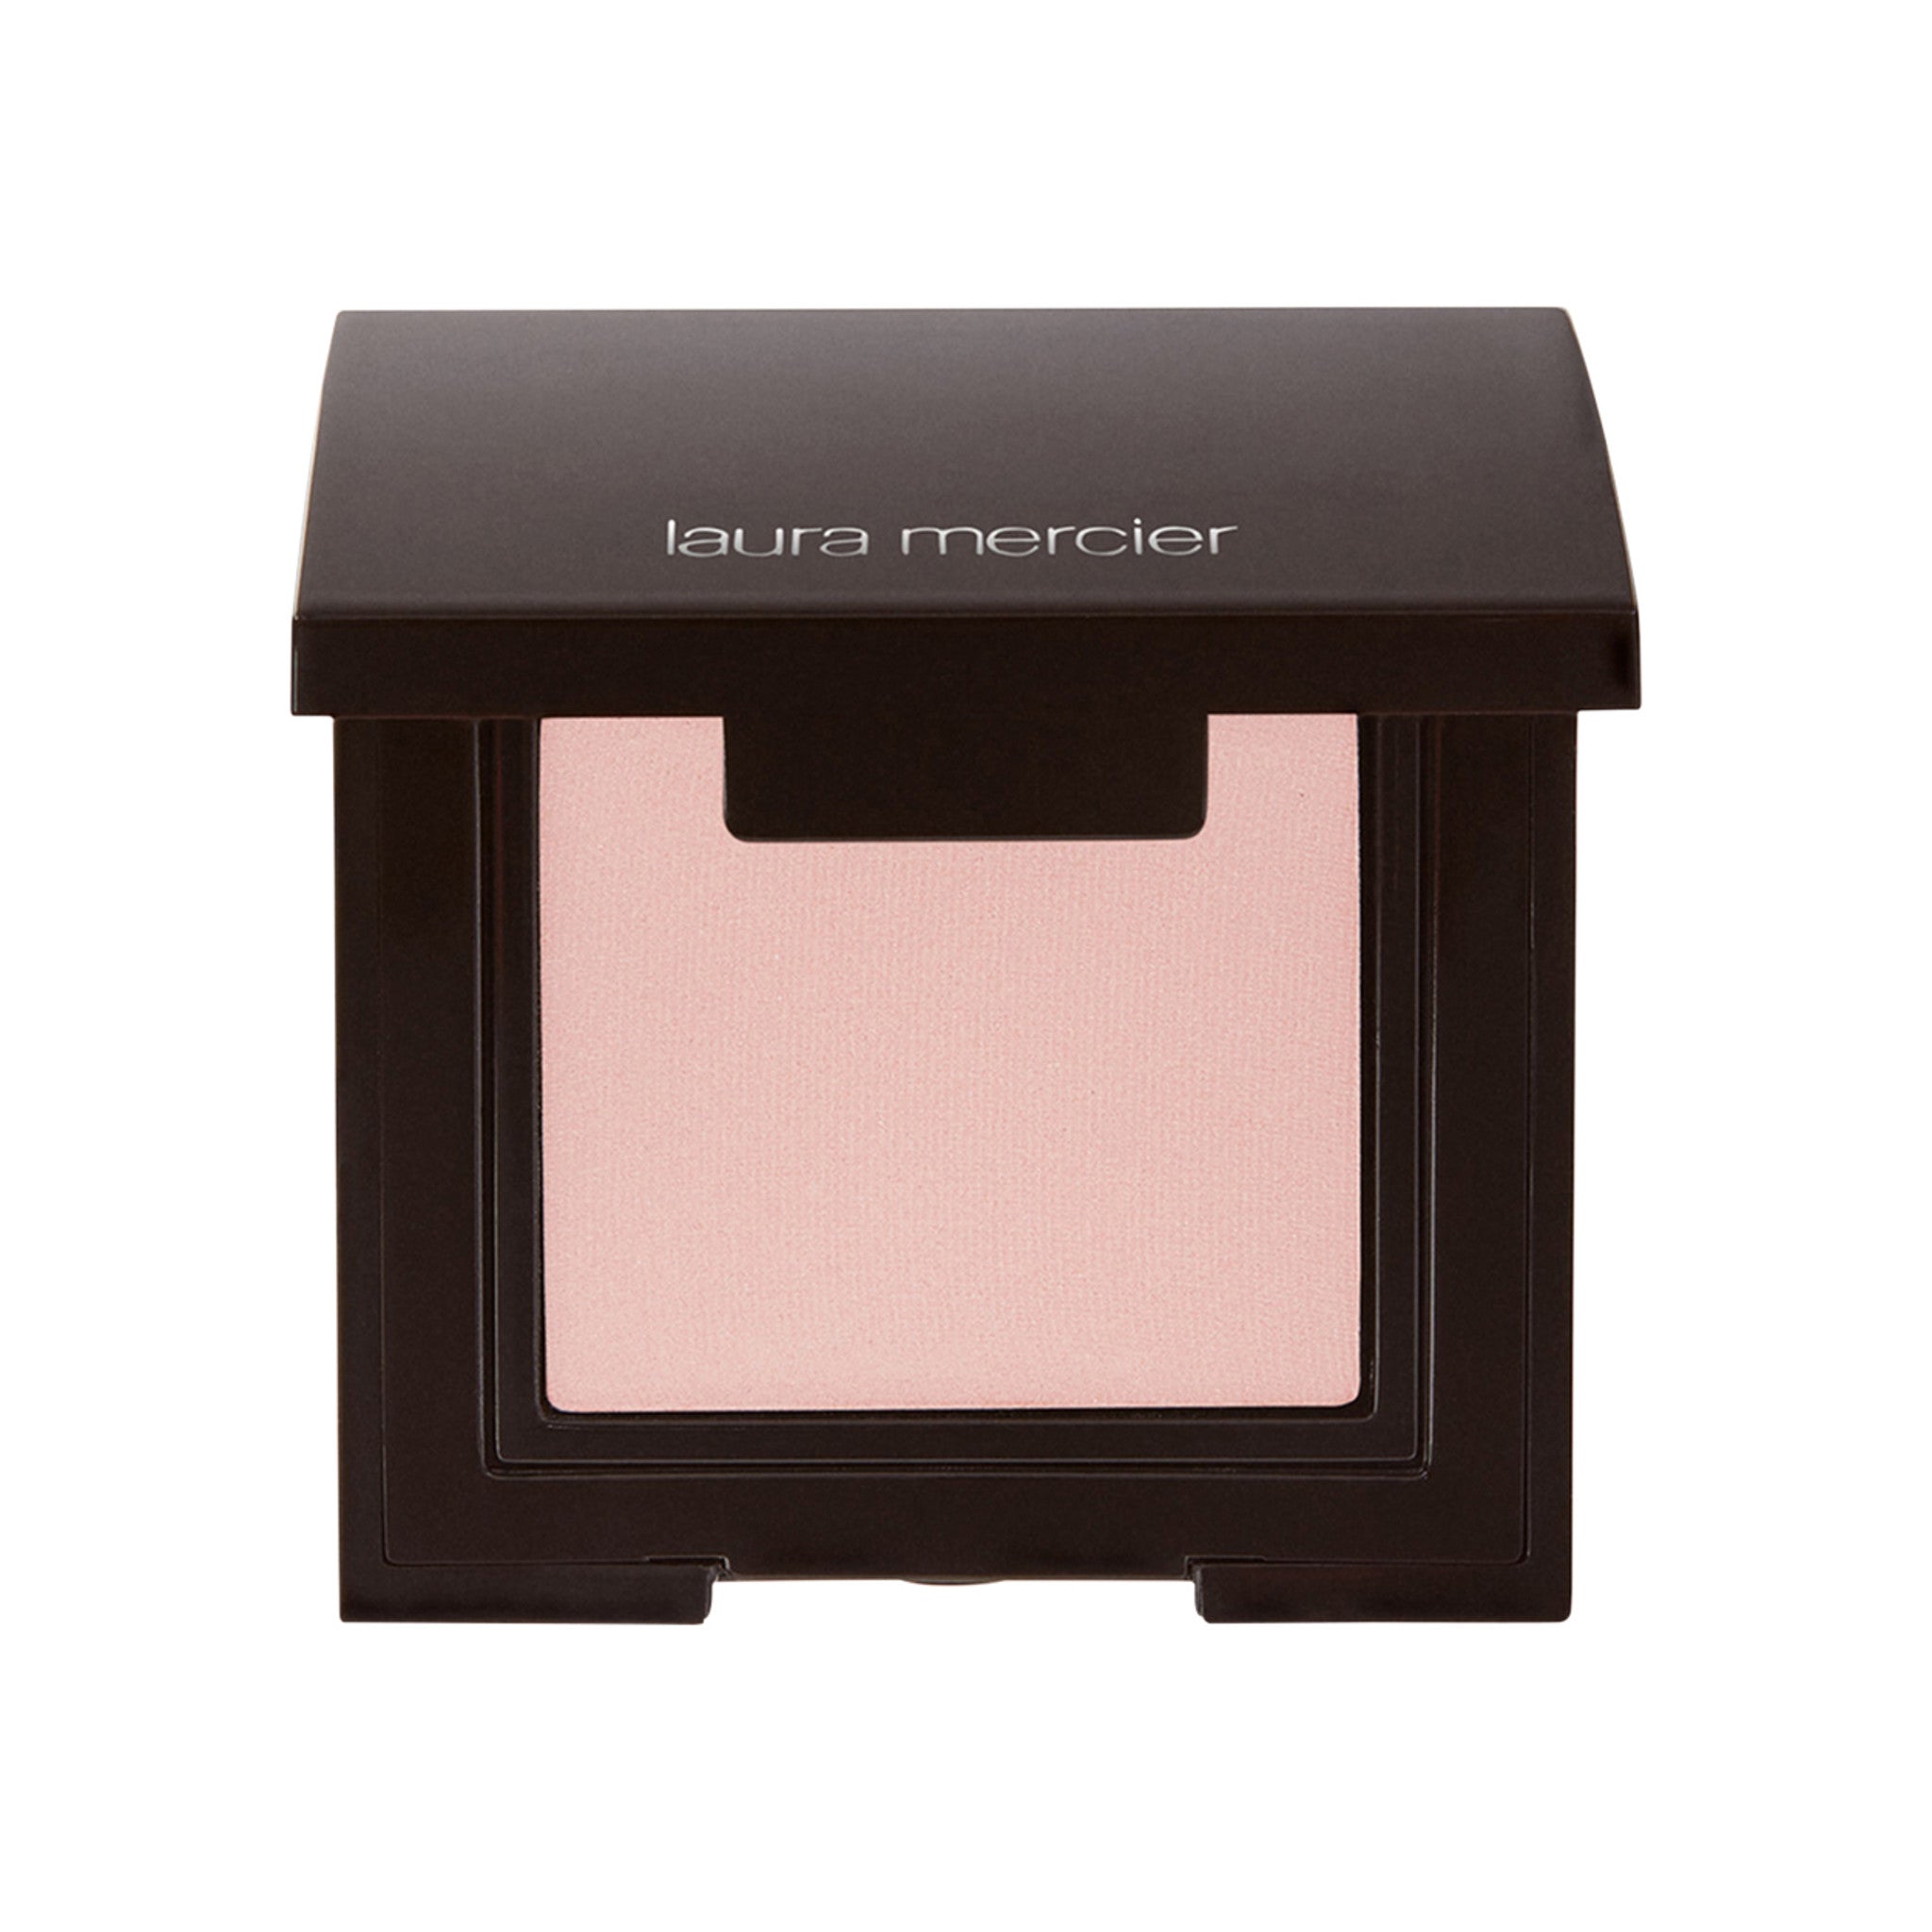 Laura Mercier Sateen Eye Colour Color/Shade variant: Sandstone main image. This product is in the color nude